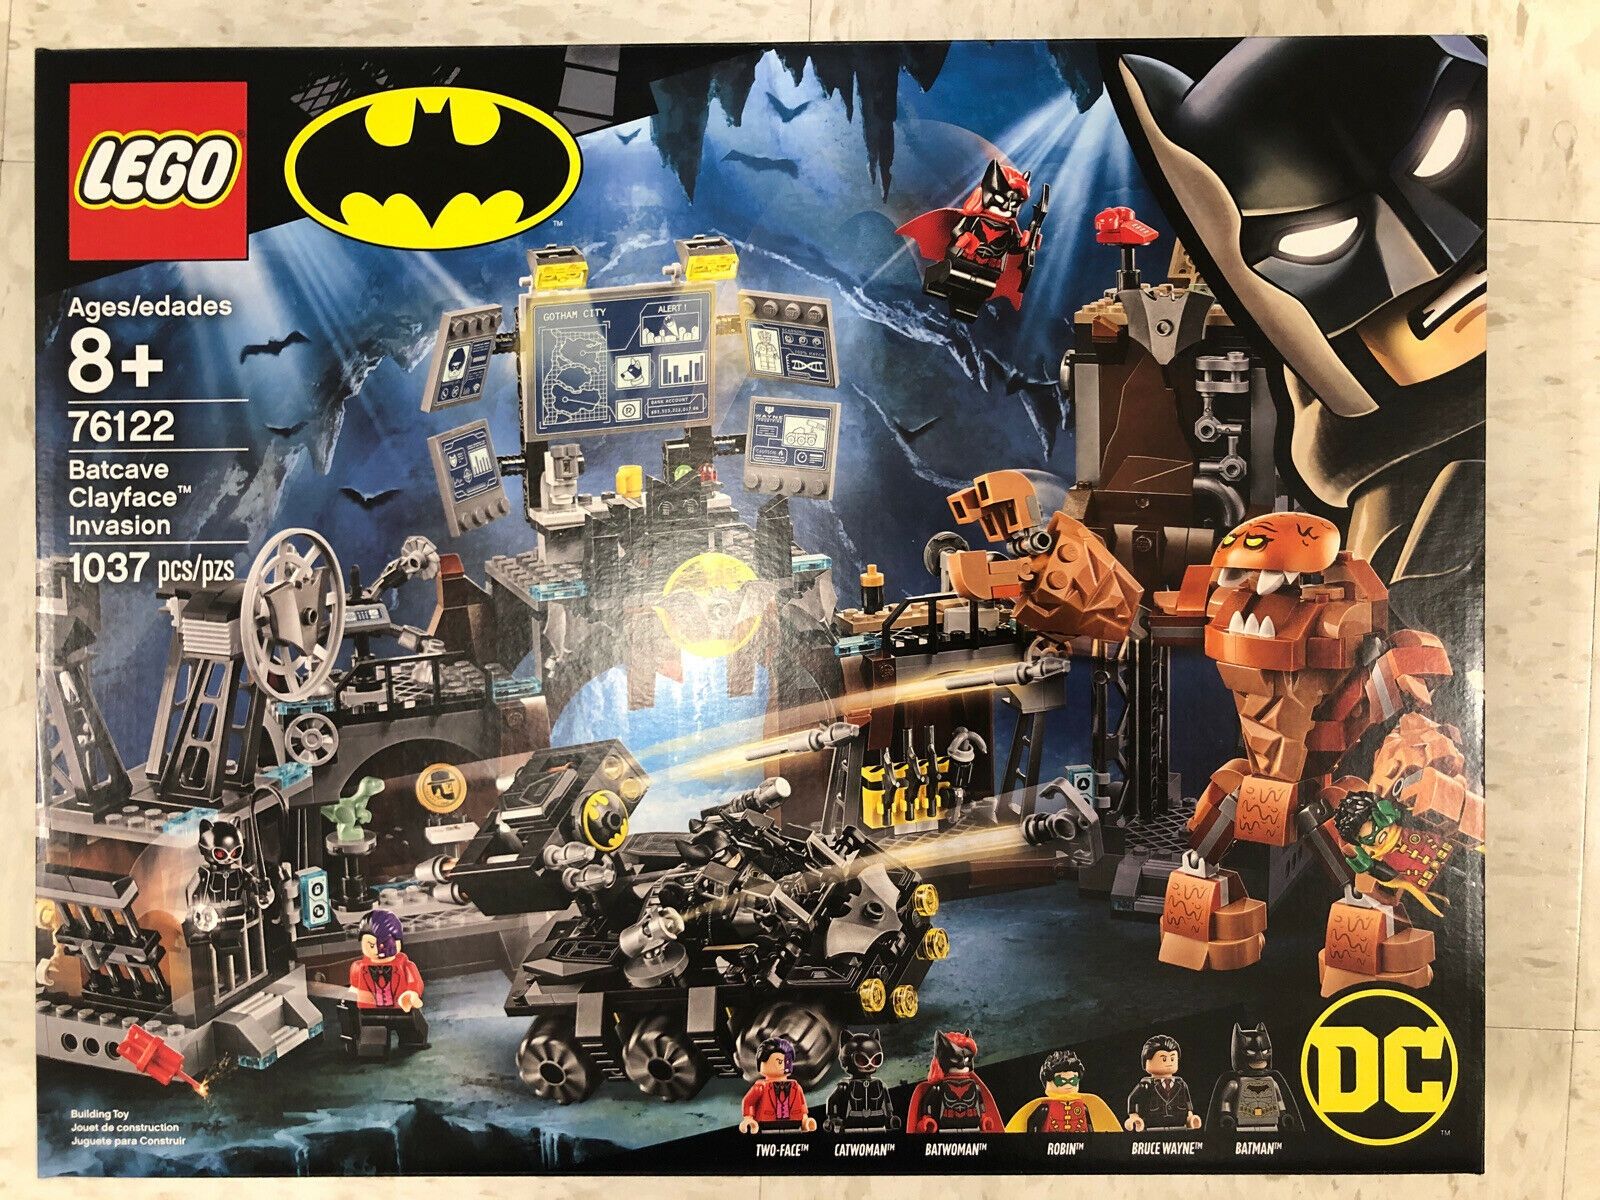 New LEGO 76122 Super Heroes Batcave Clayface Invasion Batman Toy Building Kit with Minifigures